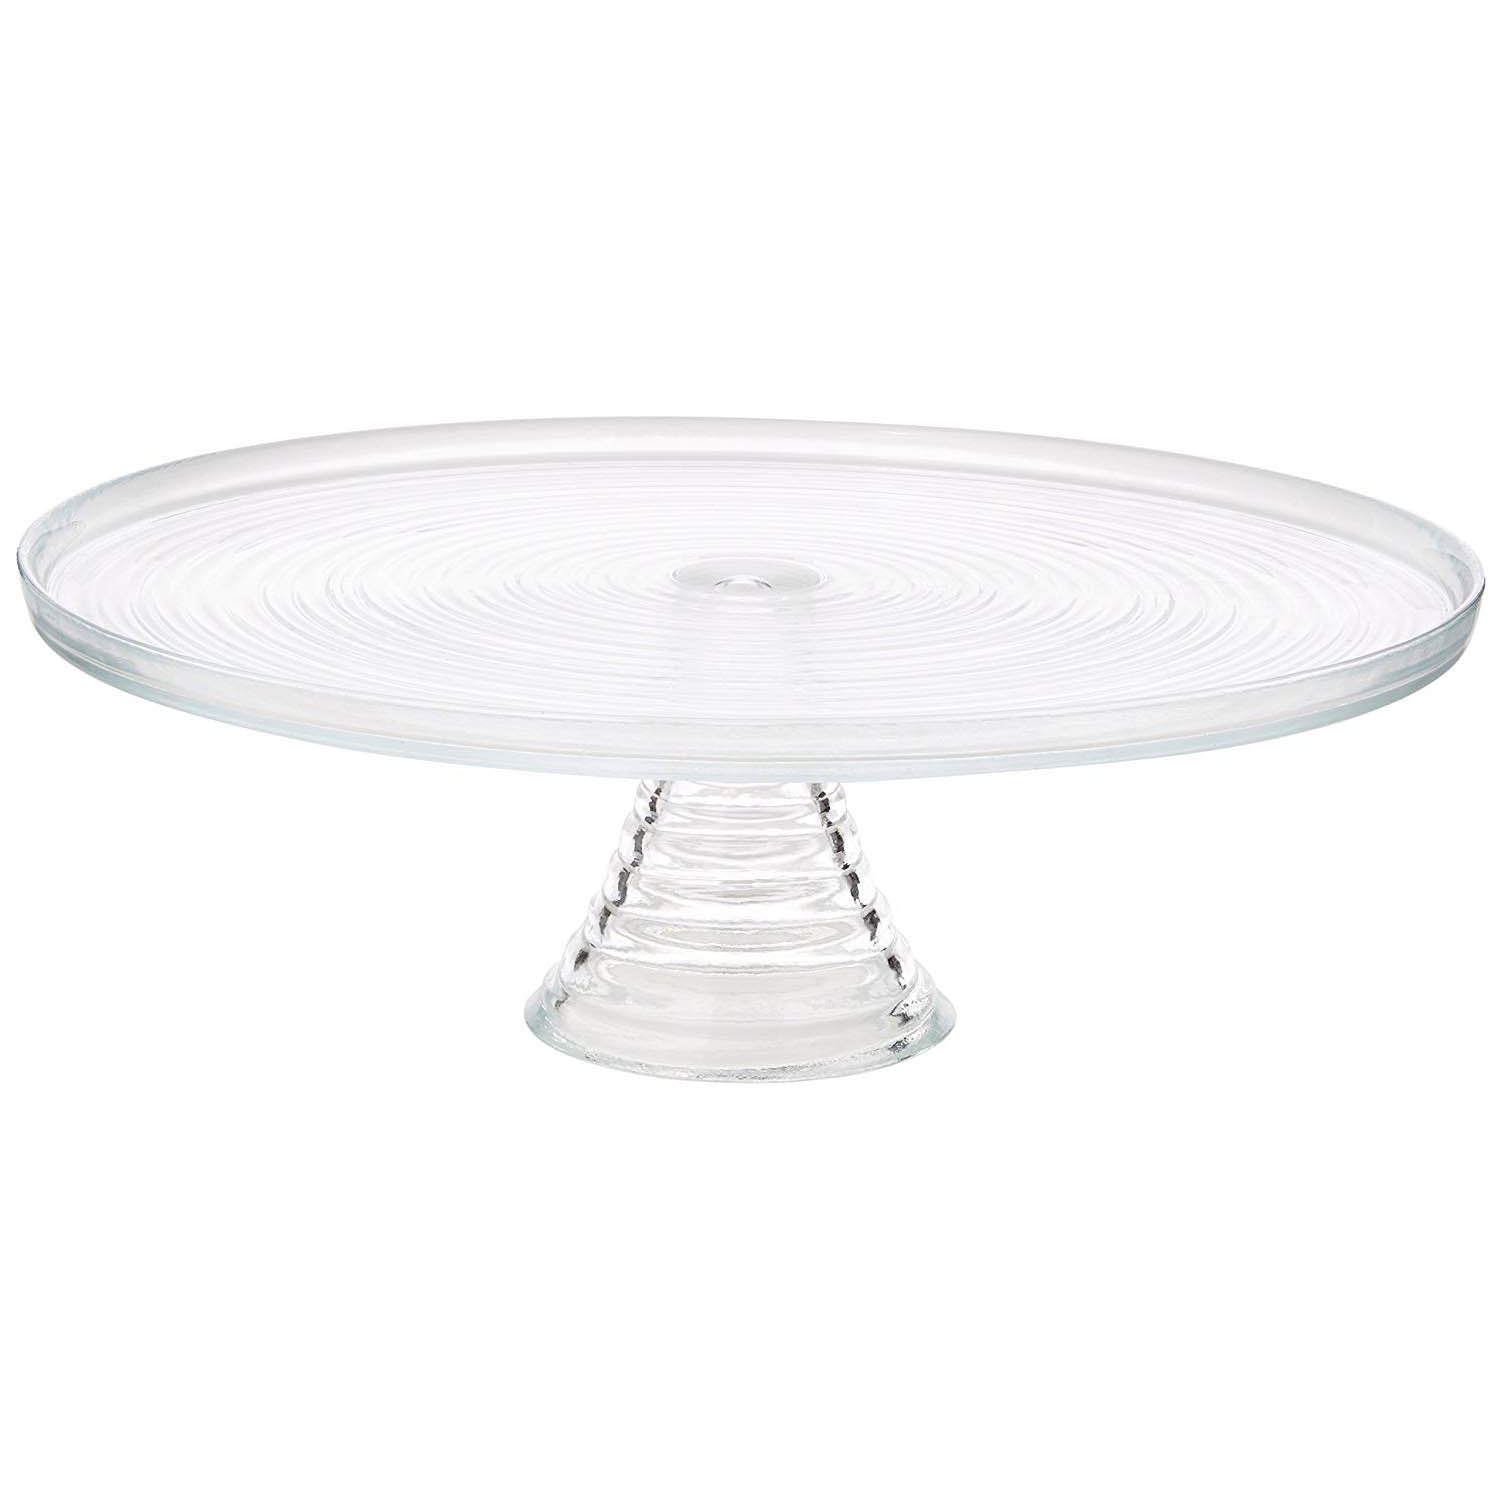 Round Glass Cake Stand Party Display Stand